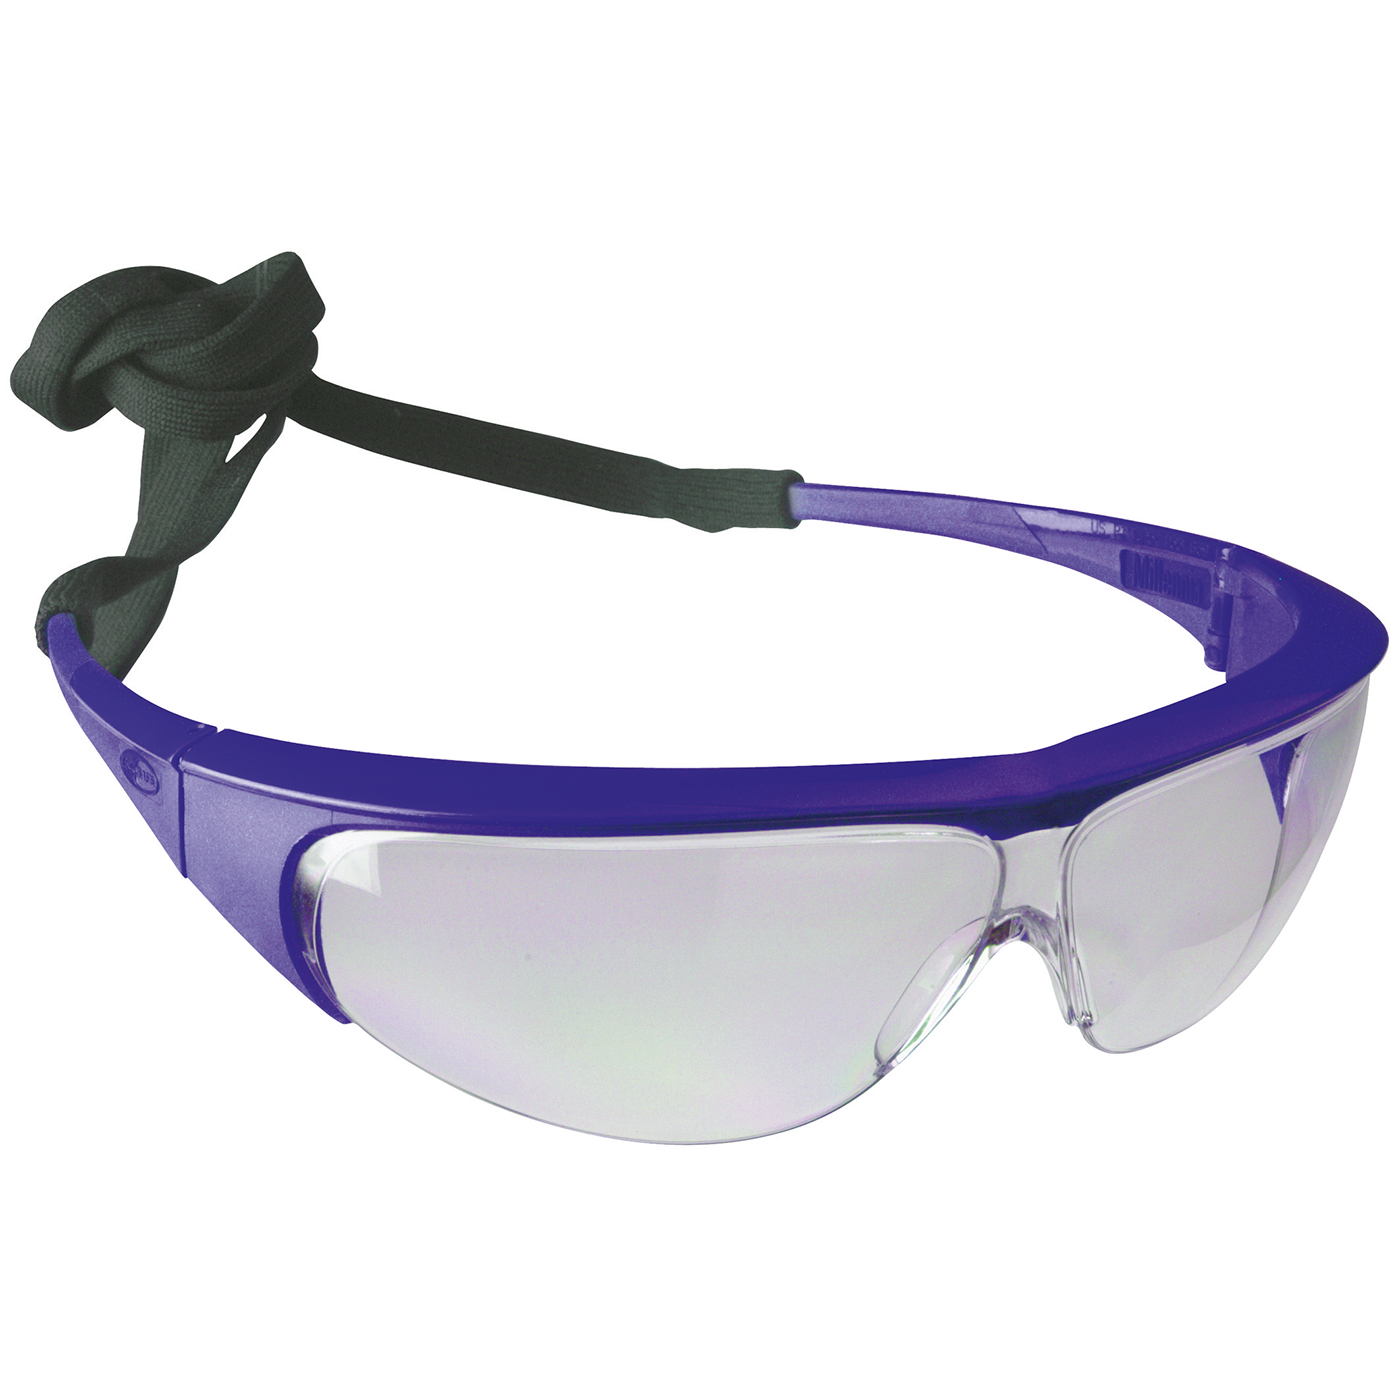 Millennia Protective Goggles, Lens Clear, Frame Blue - 1 piece